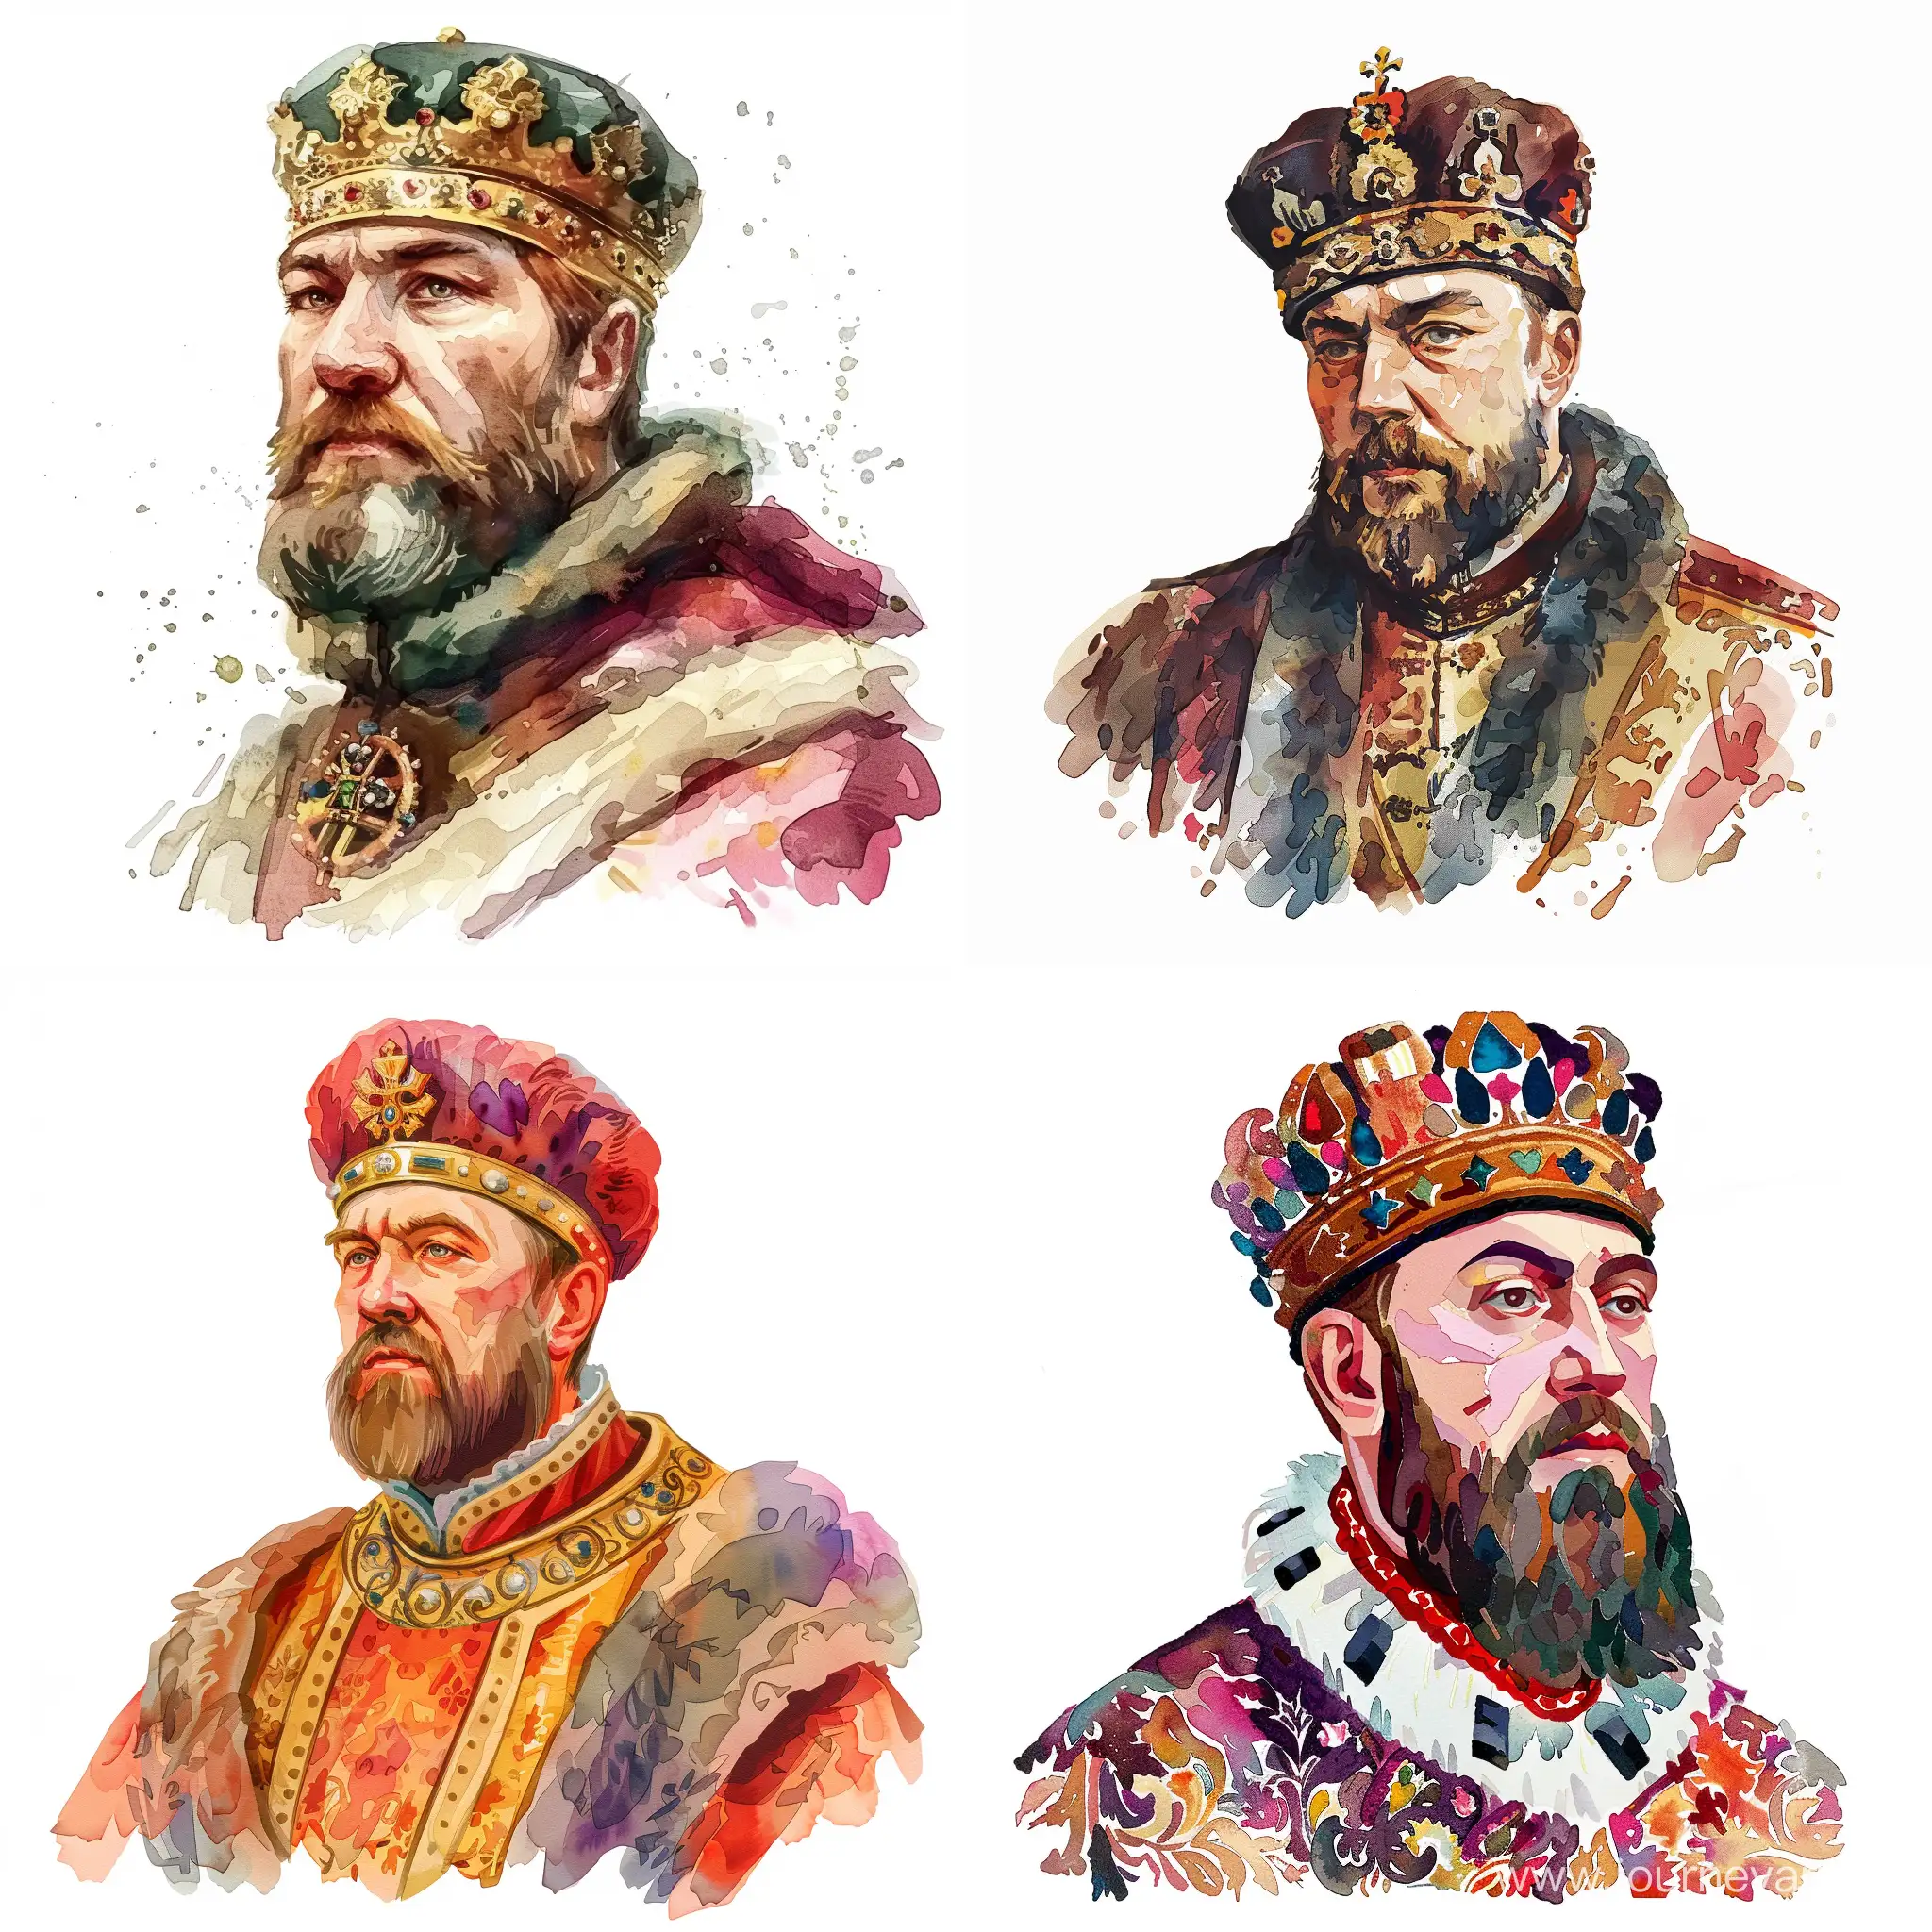 Portrait-of-Russian-Tsar-Ivan-III-in-Watercolor-Style-by-Victor-Ngai